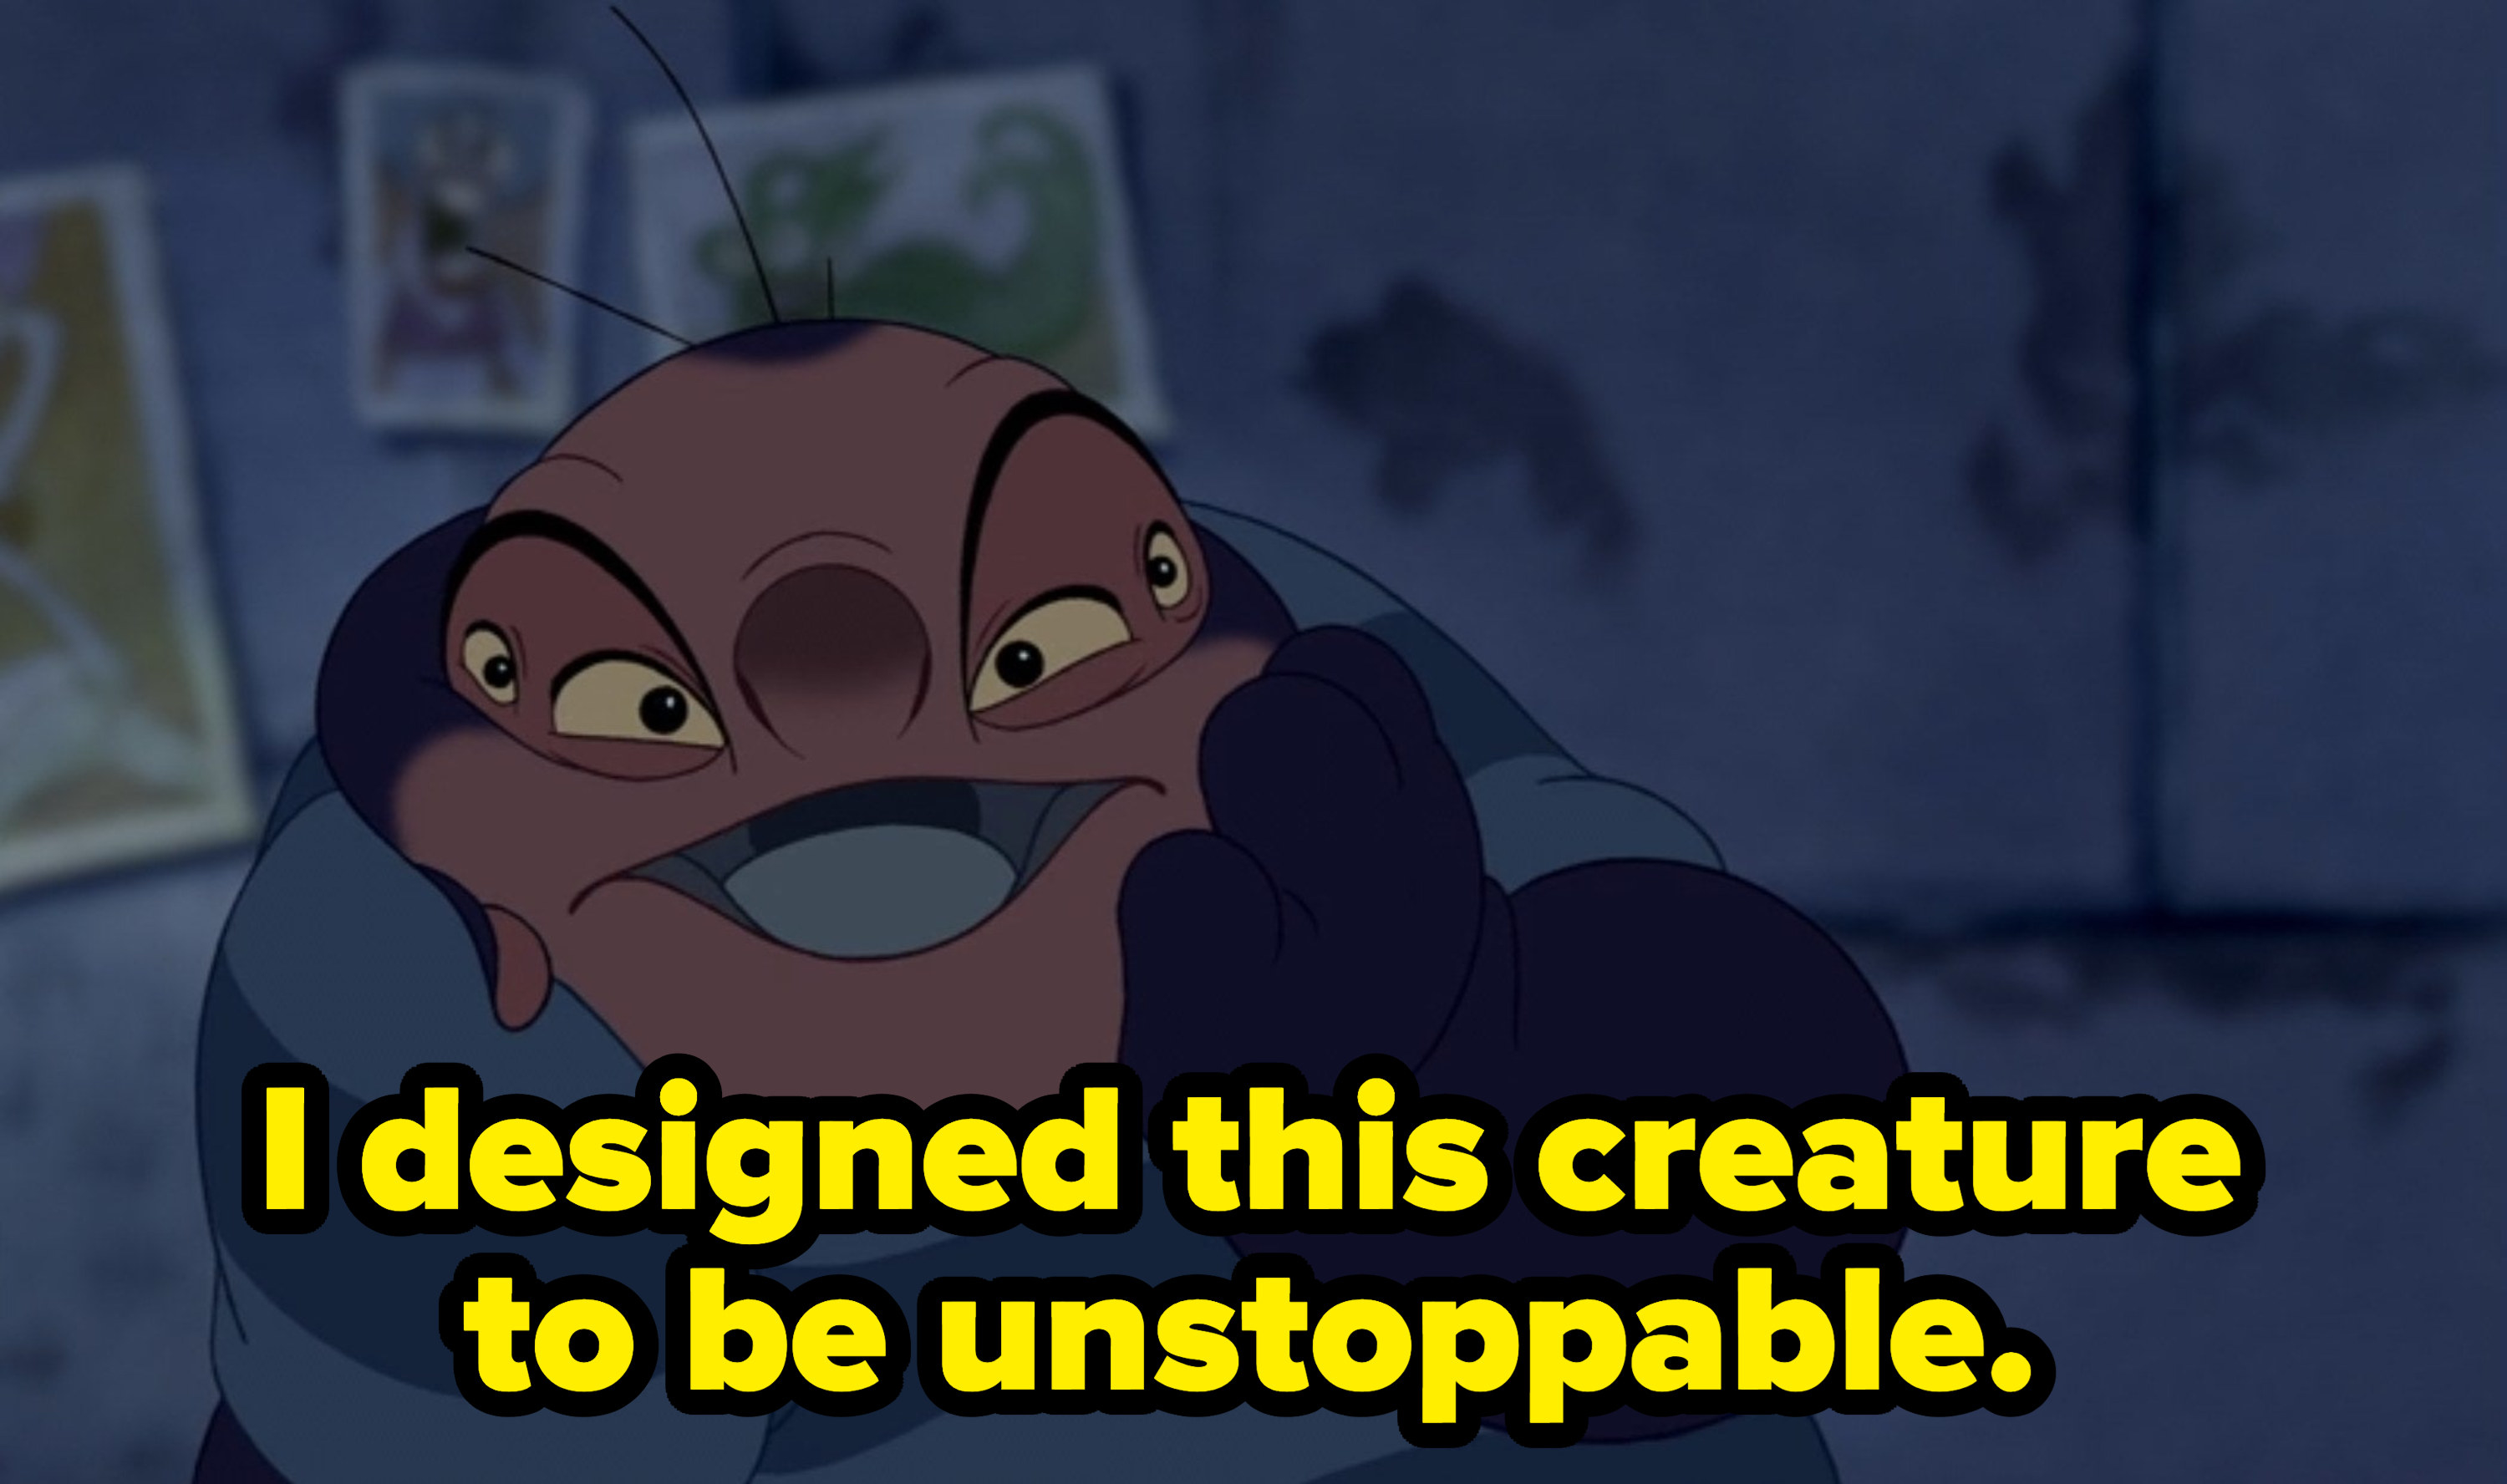 Jumba saying I designed this creature to be unstoppable.